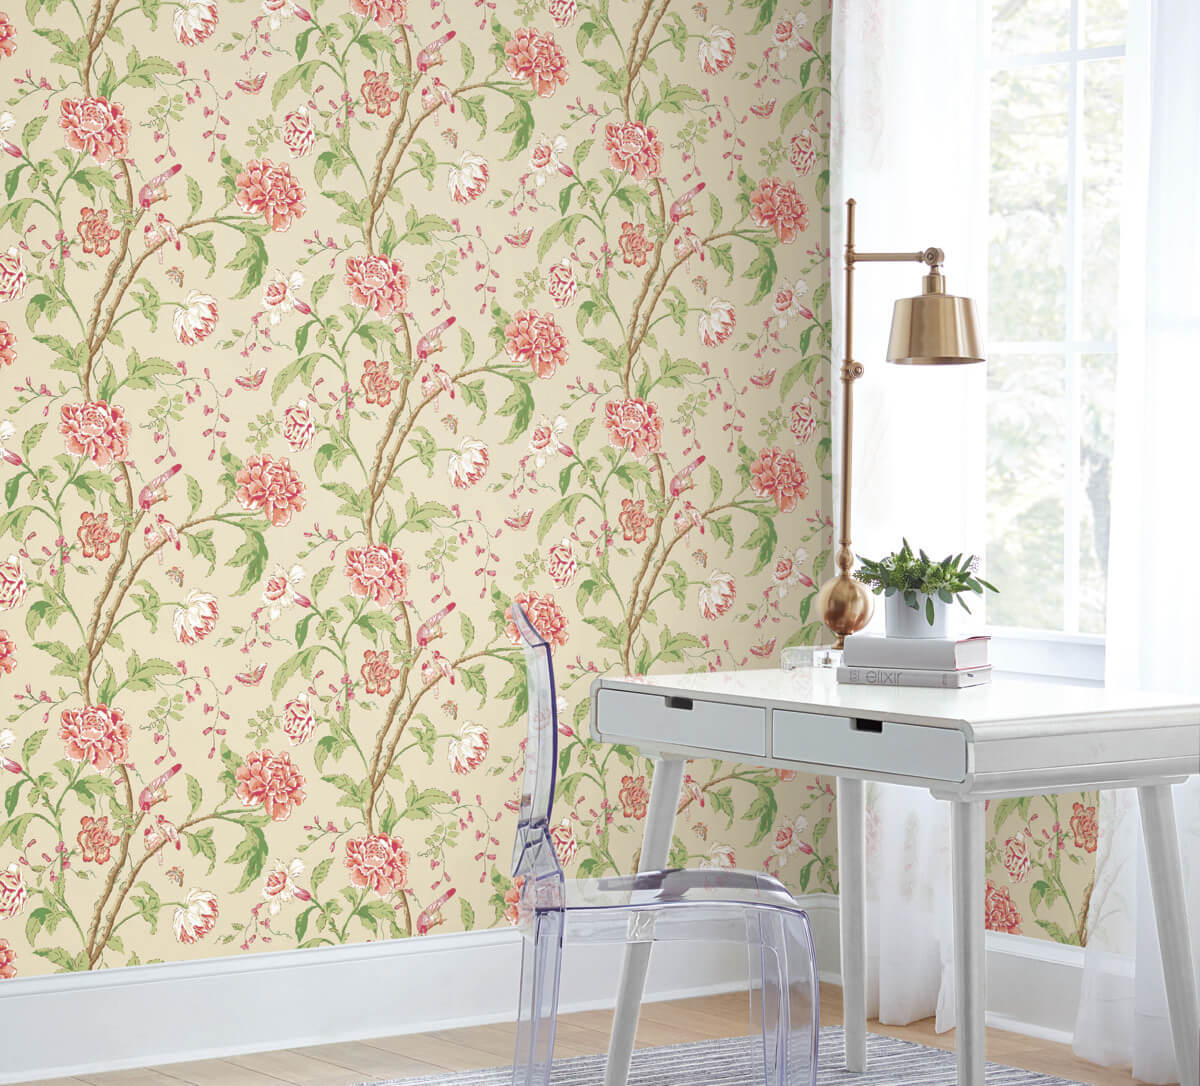 Blooms Second Edition Teahouse Floral Wallpaper - Cream & Coral